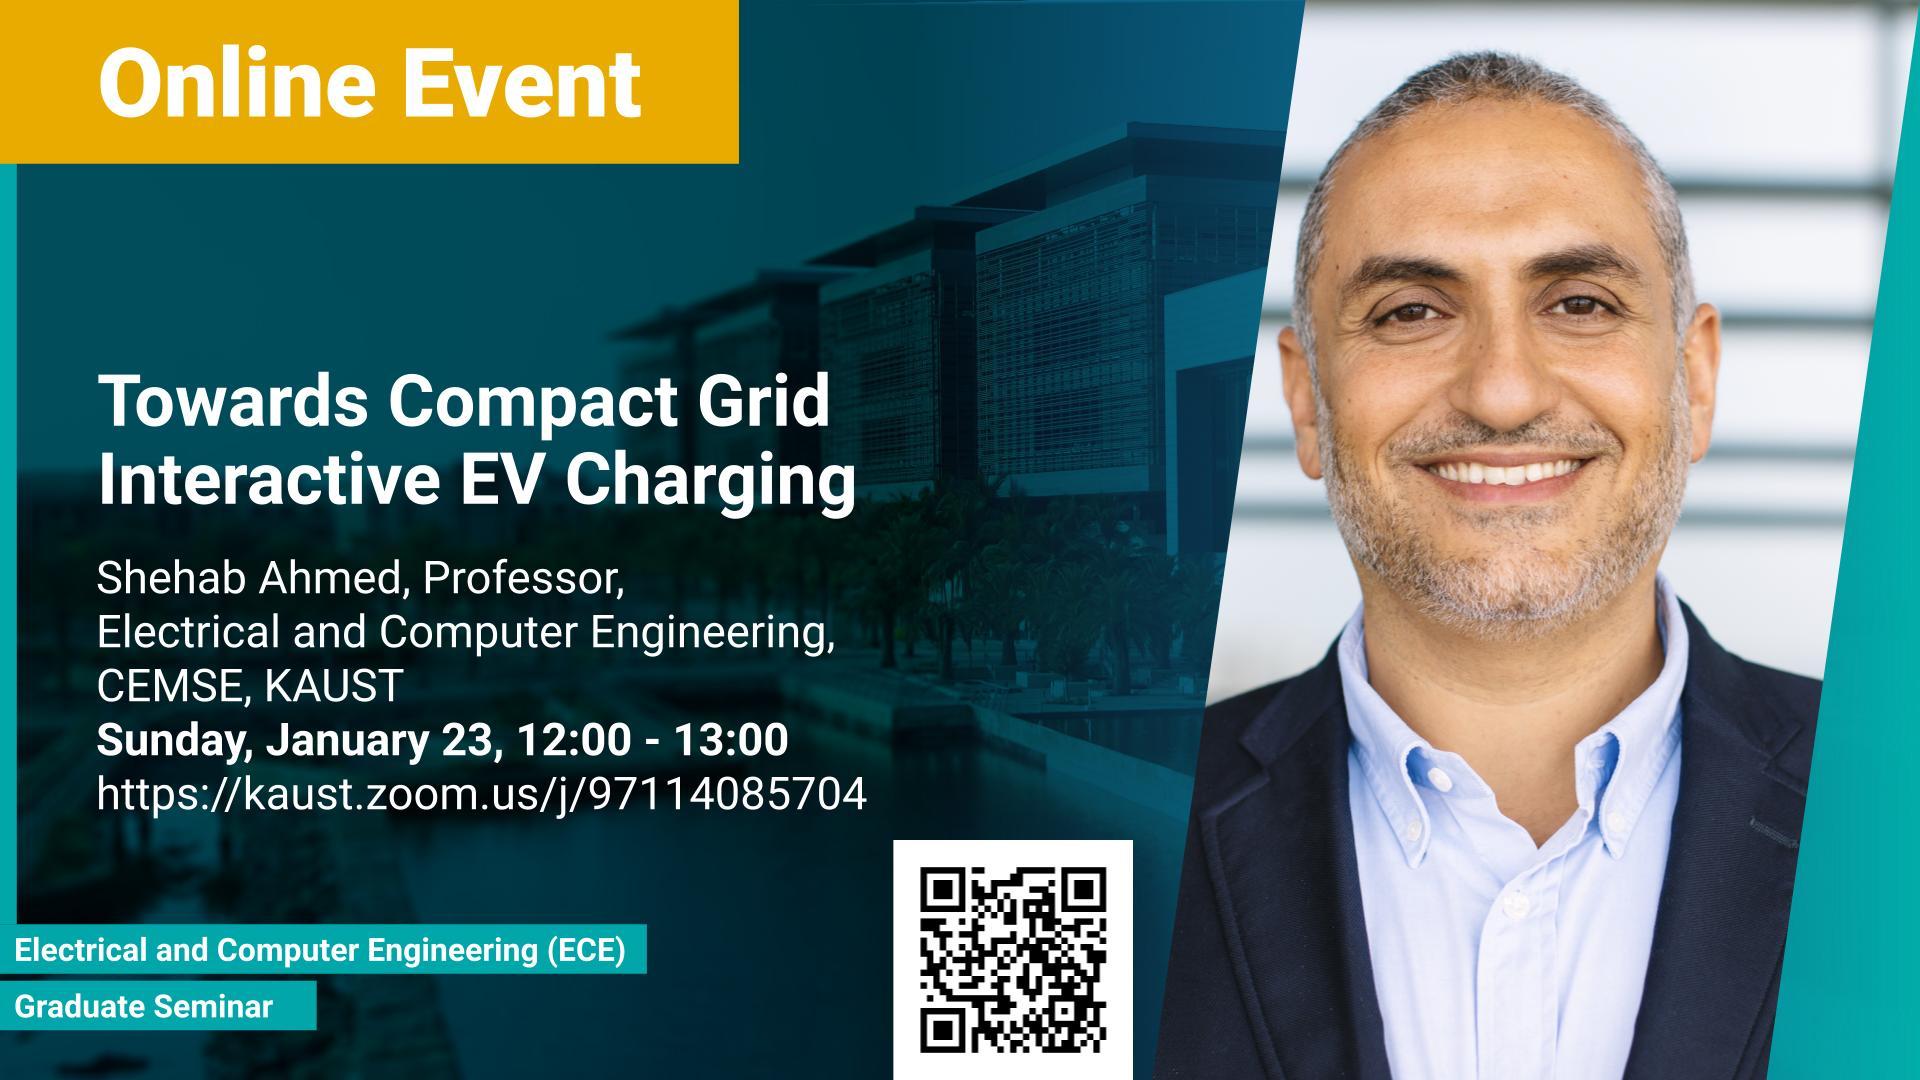 KAUST-CEMSE ECE Shehab Ahmed Towards Compact Grid Interactive EV Charging